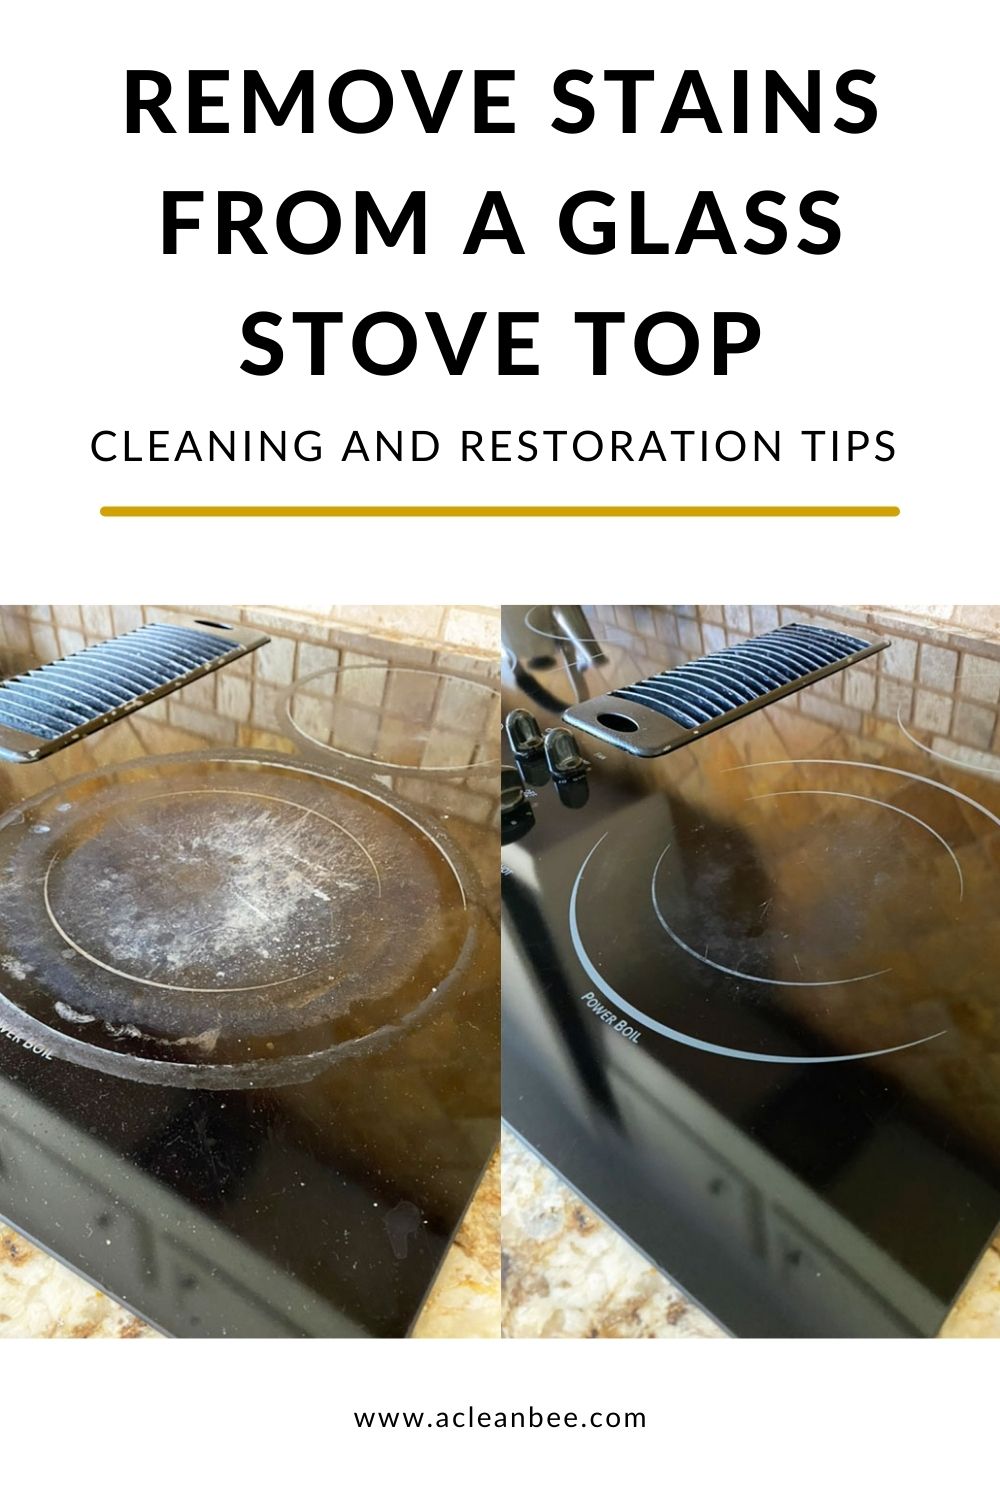 How To Clean Burnt Stove How to Remove Burn Marks from a Glass Stove Top